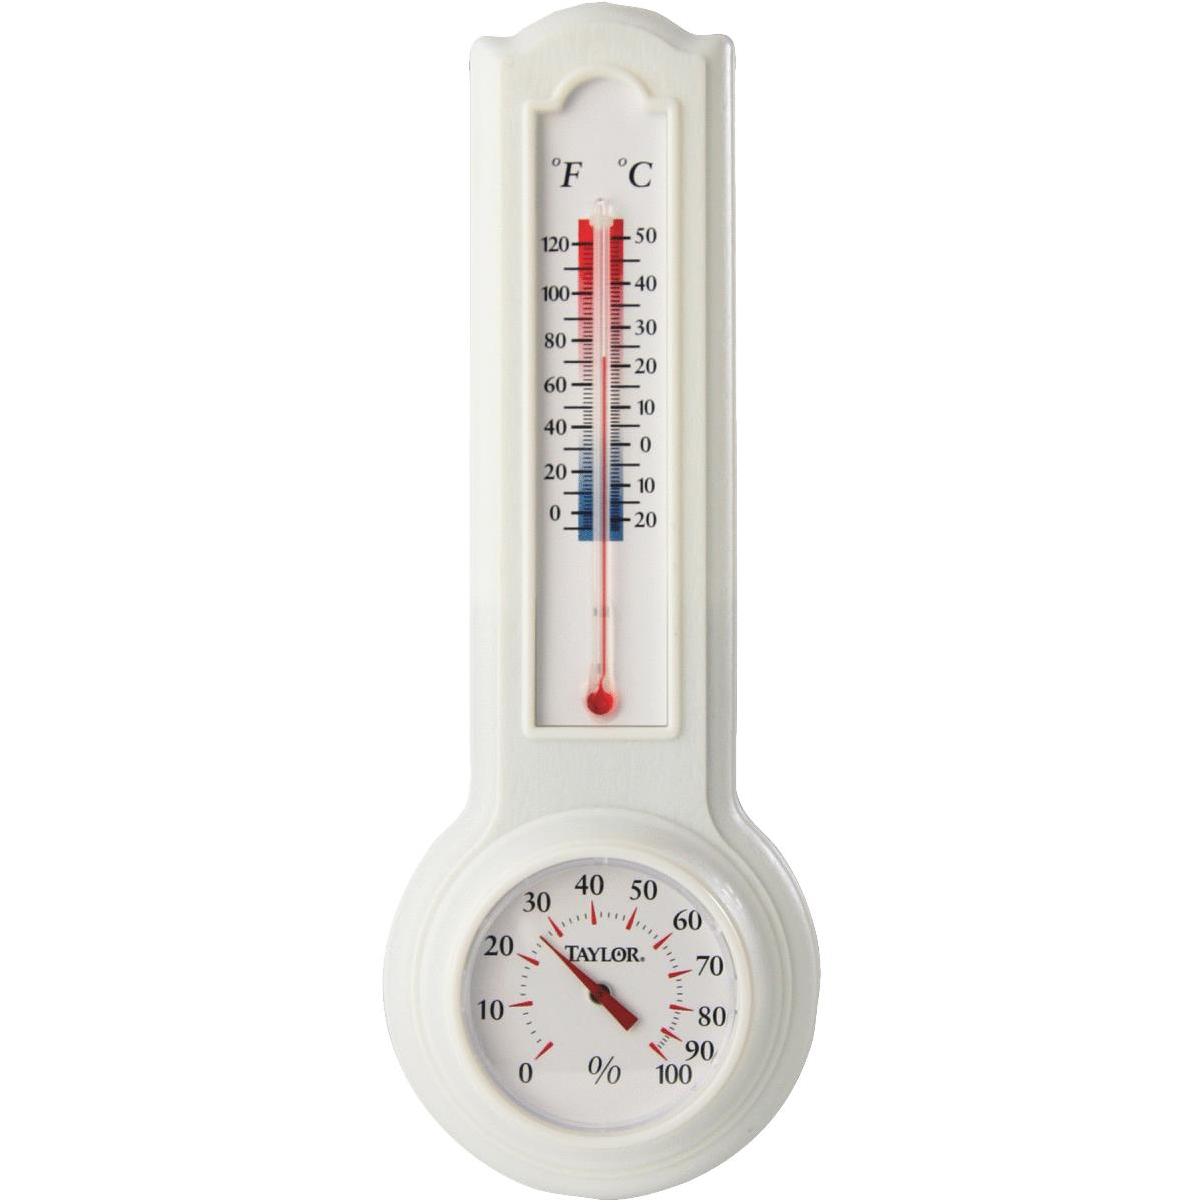 Taylor 8 In. Tube Outdoor Window Thermometer